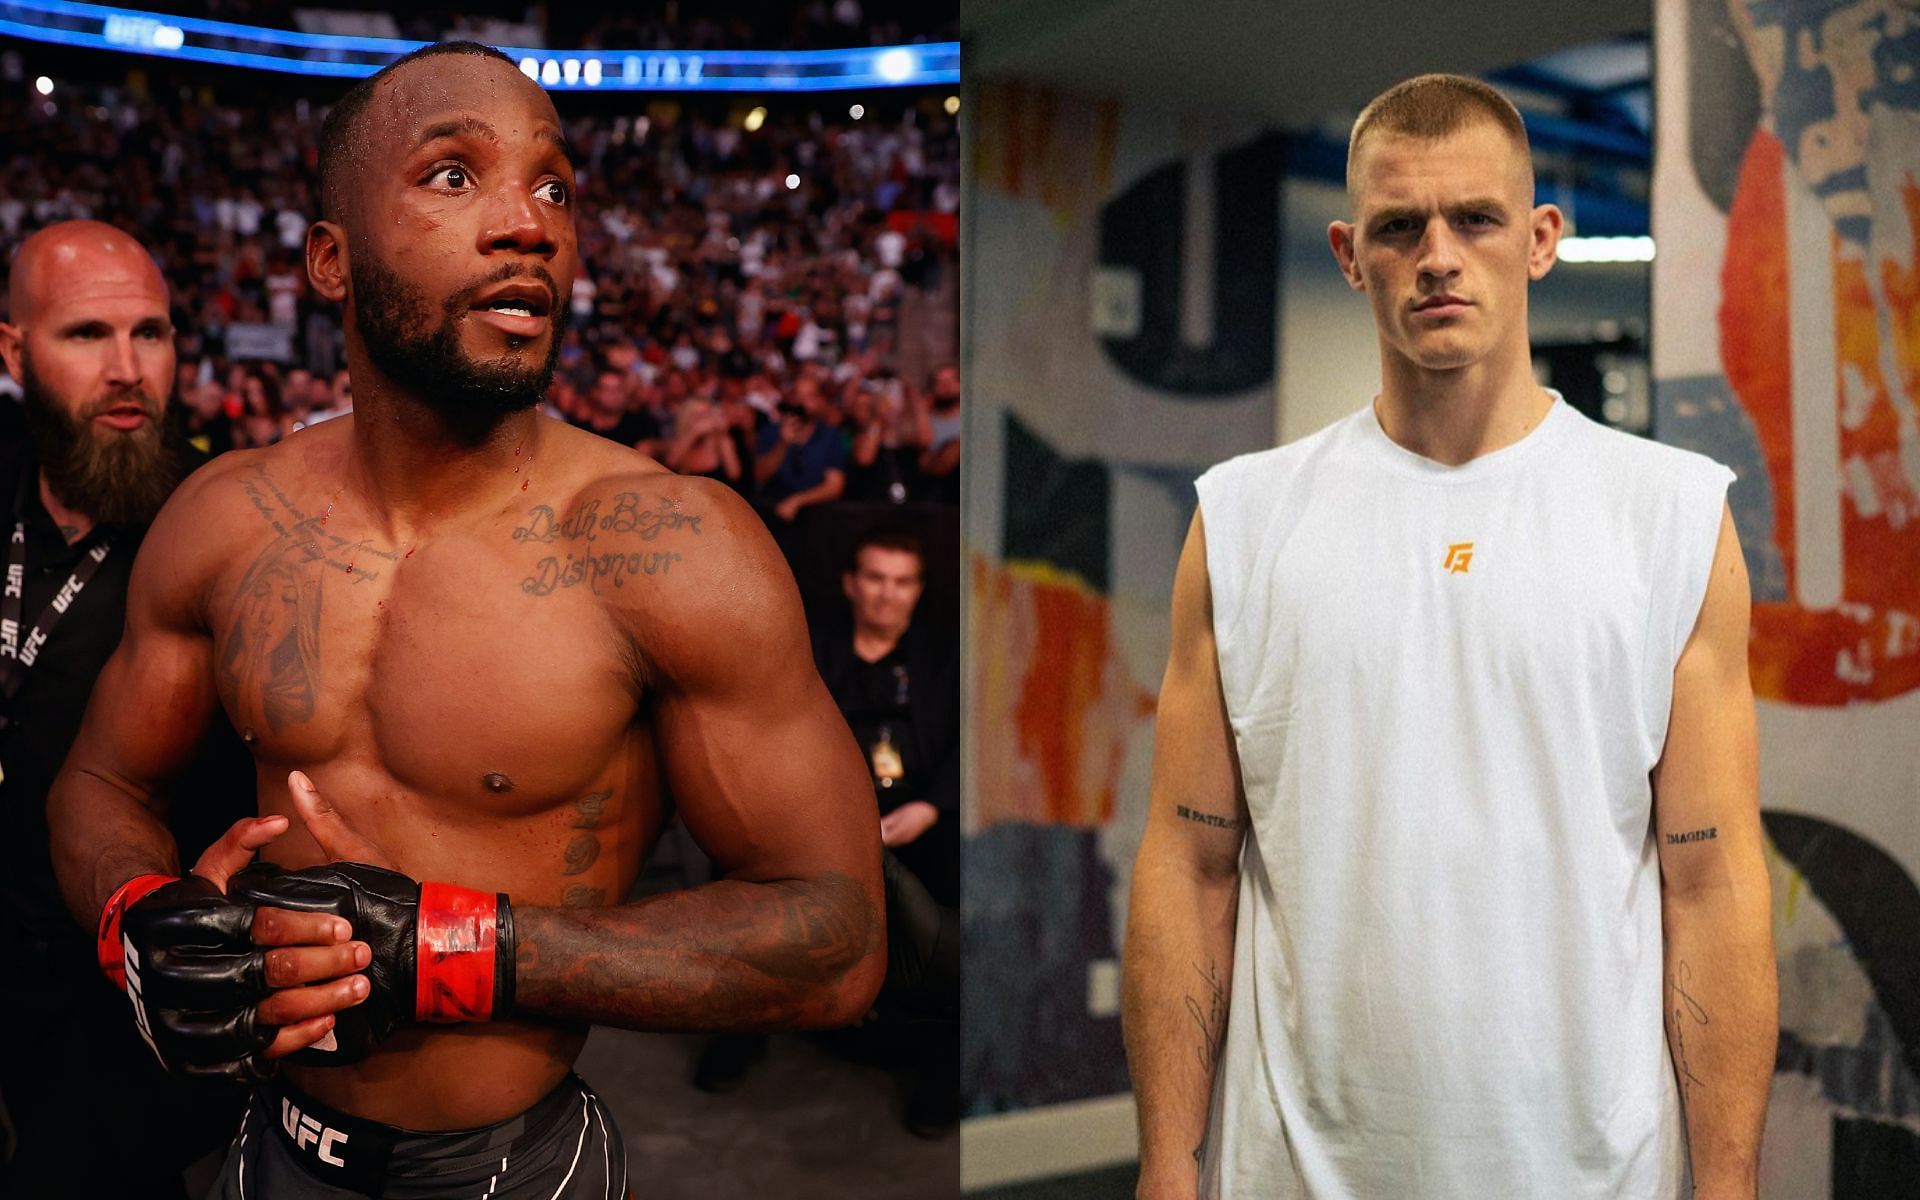 Leon Edwards and Ian Garry [Image credits: Getty Images and @iangarry on Instagram] 